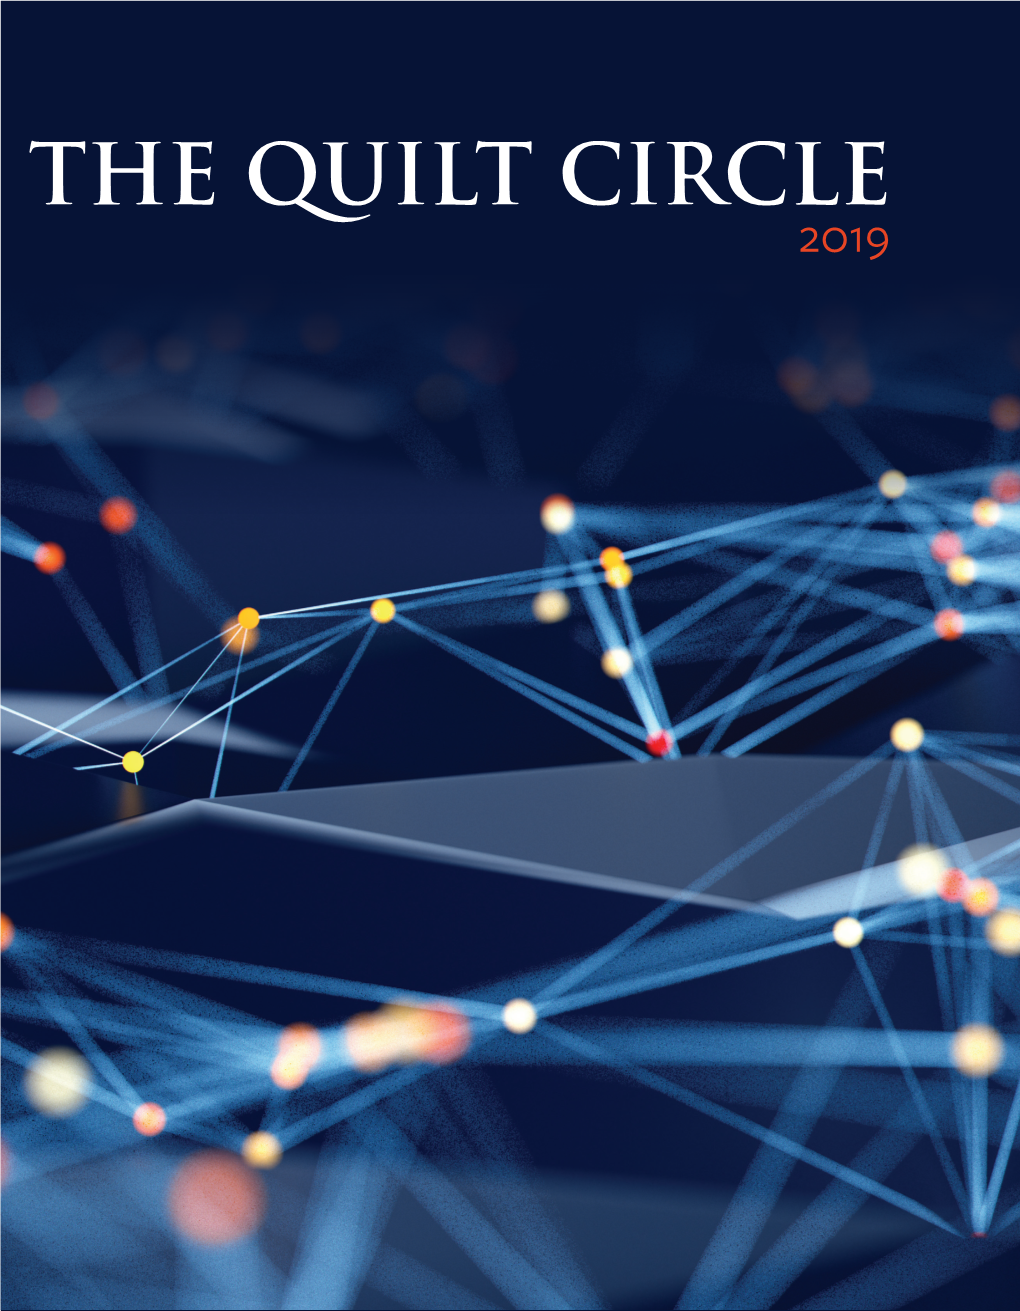 THE QUILT CIRCLE 2019 a Letter from the President Welcome to the 2019 Edition of the Quilt Circle